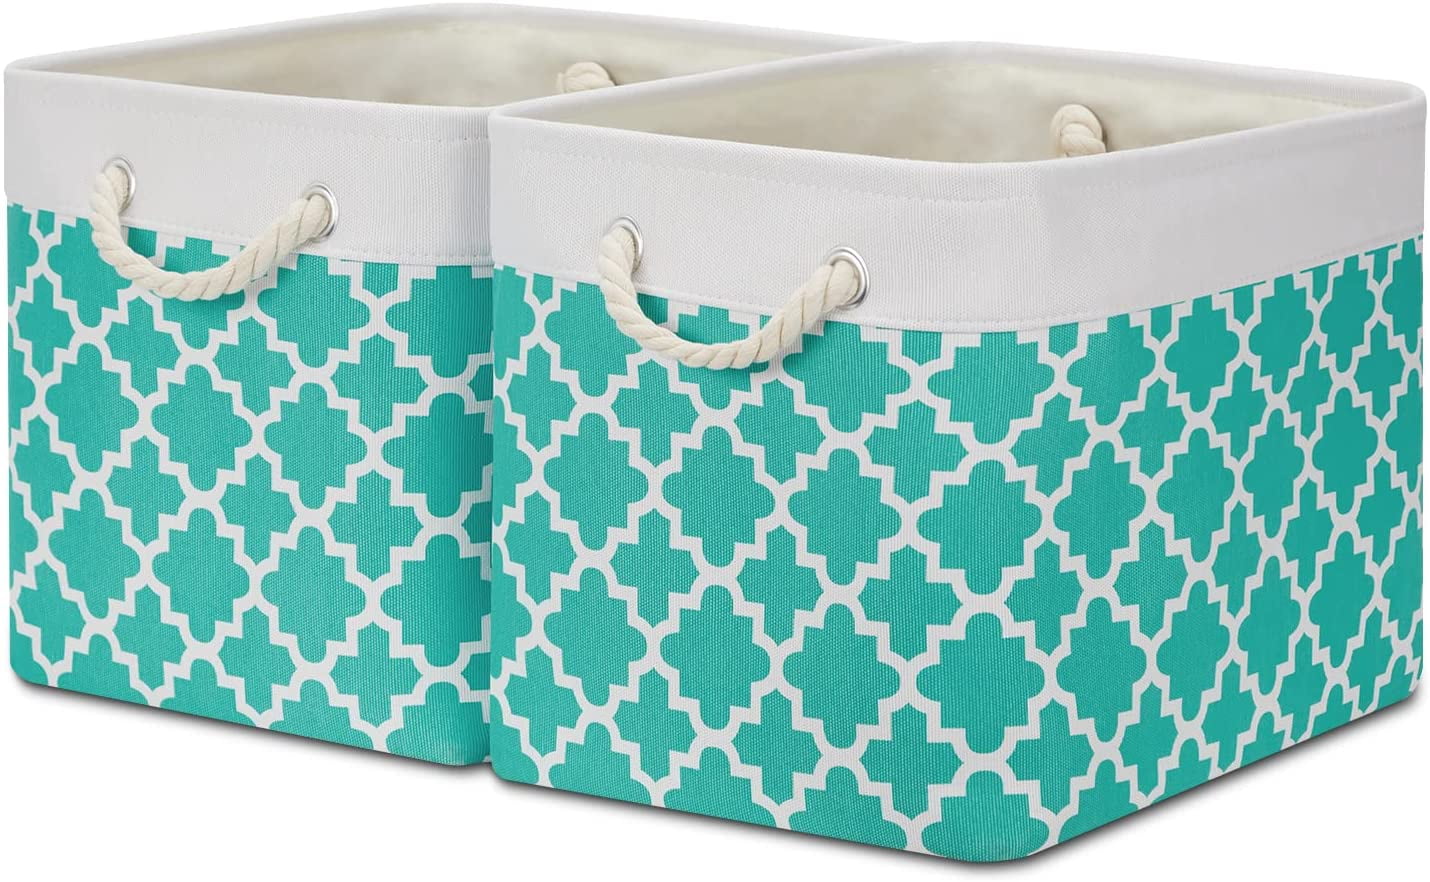 4-Pack Fabric Storage Basket with PU Handles Collapsible Organizer Basket for Towels Toys Univivi Rectangular Bins Blue, 15”X10.5”X9.5” Clothes,Closet and Shelves, 